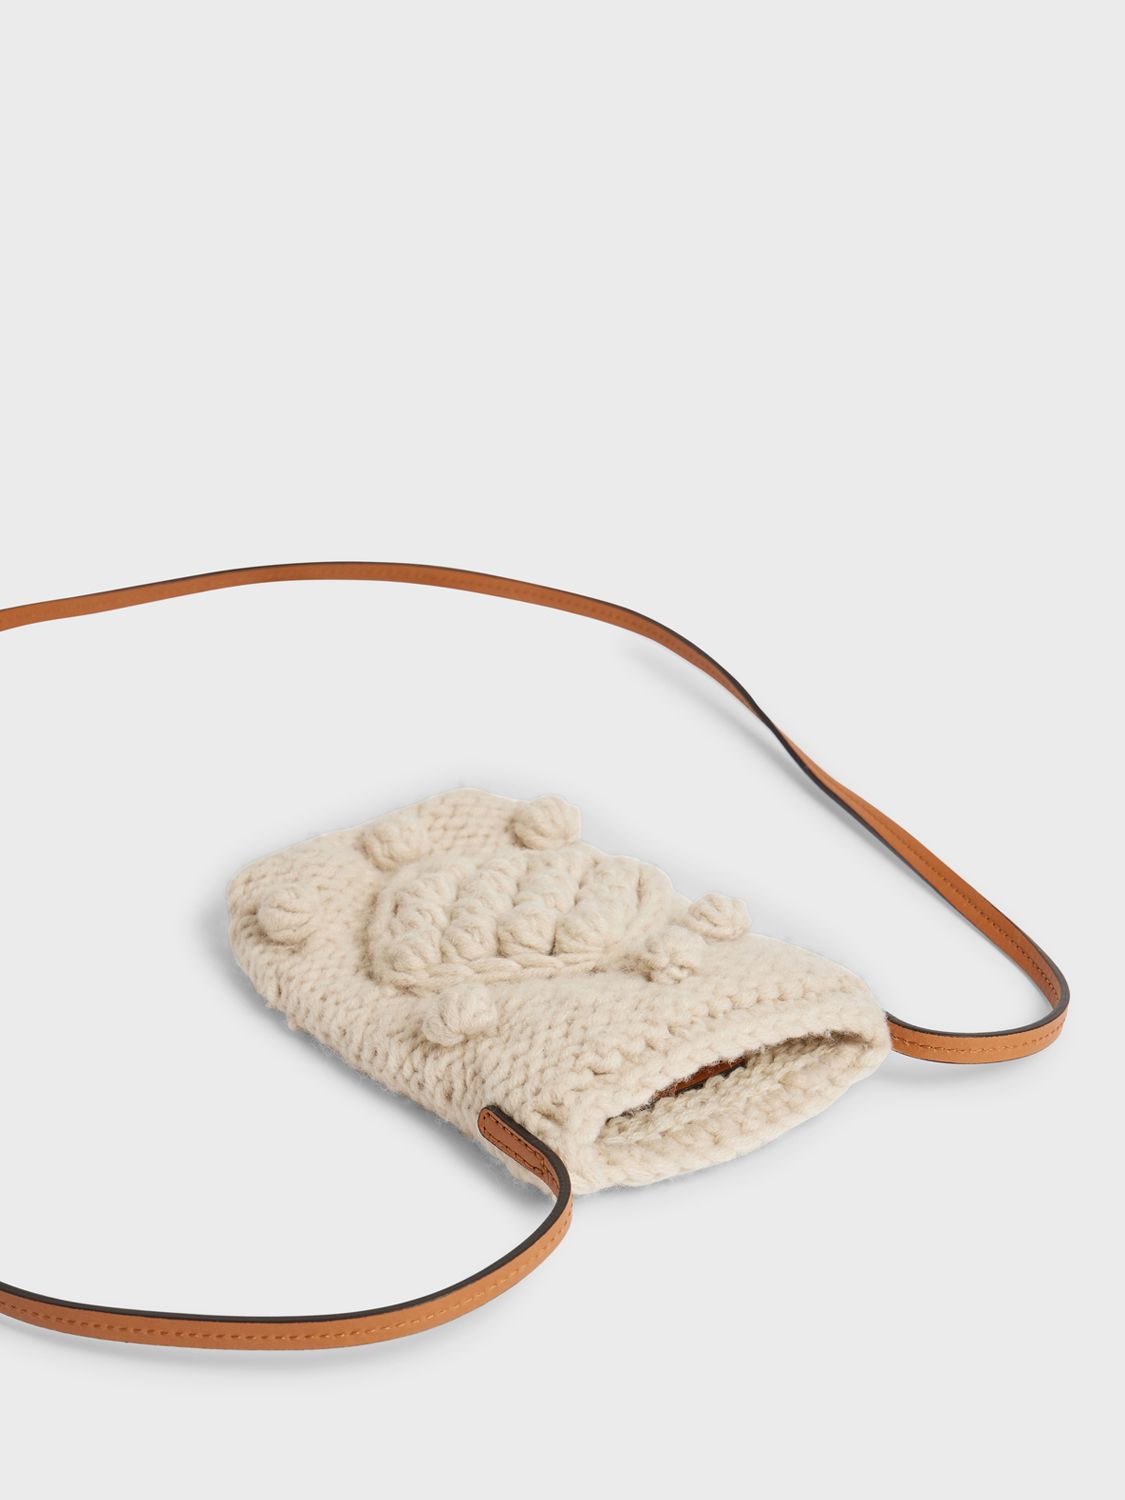 Gerard Darel Rosie Small Knitted Crossbody Bag, Natural, One Size